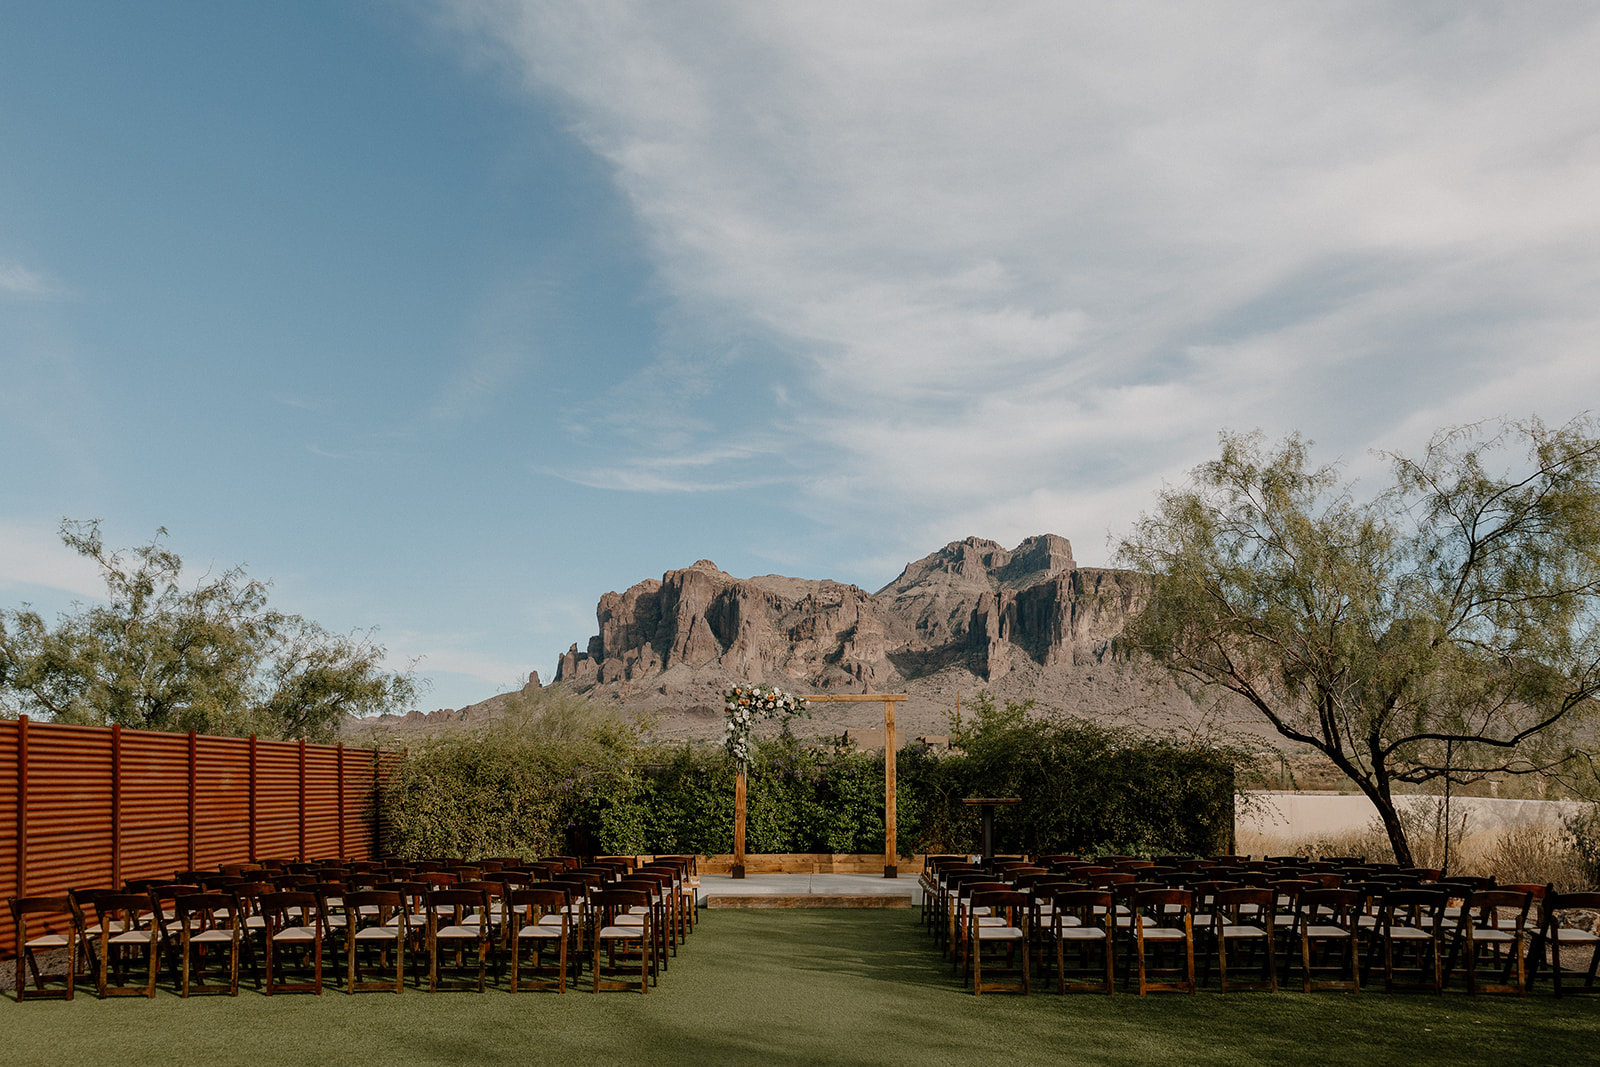 stunning Arizona wedding ceremony set up and ready for the big day!